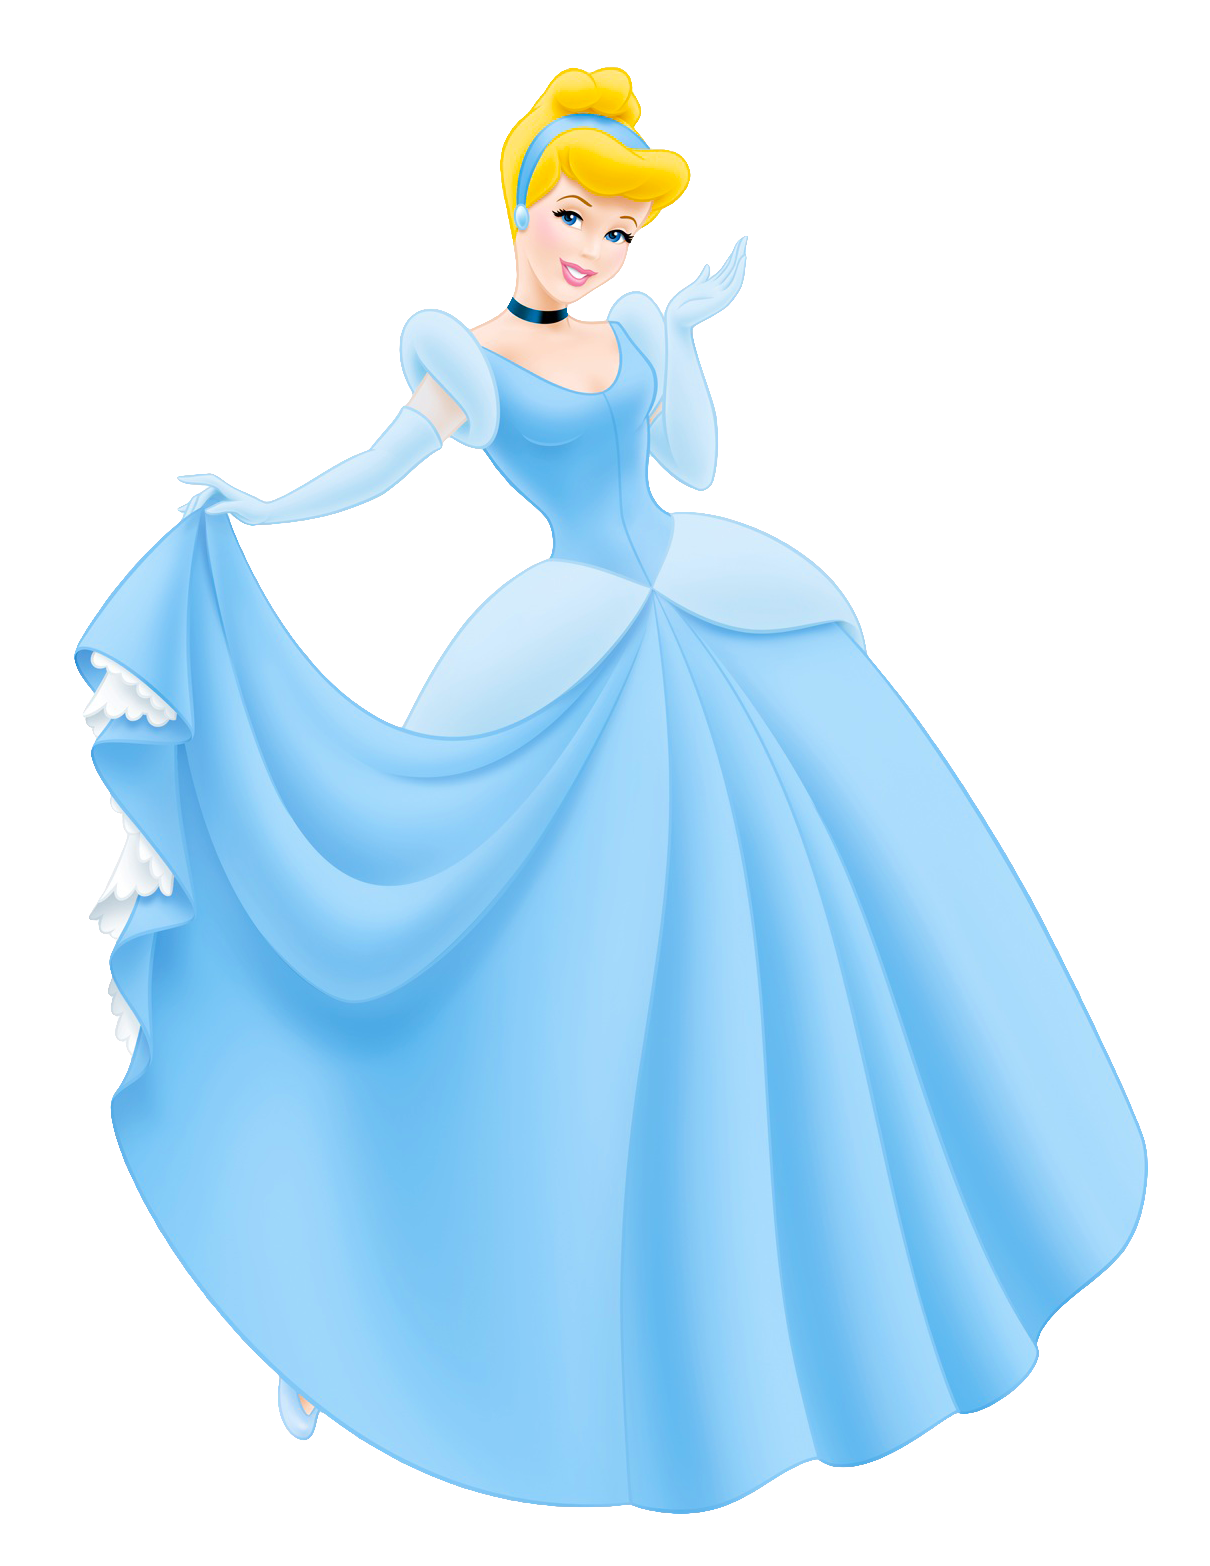 Cinderella with rose.png